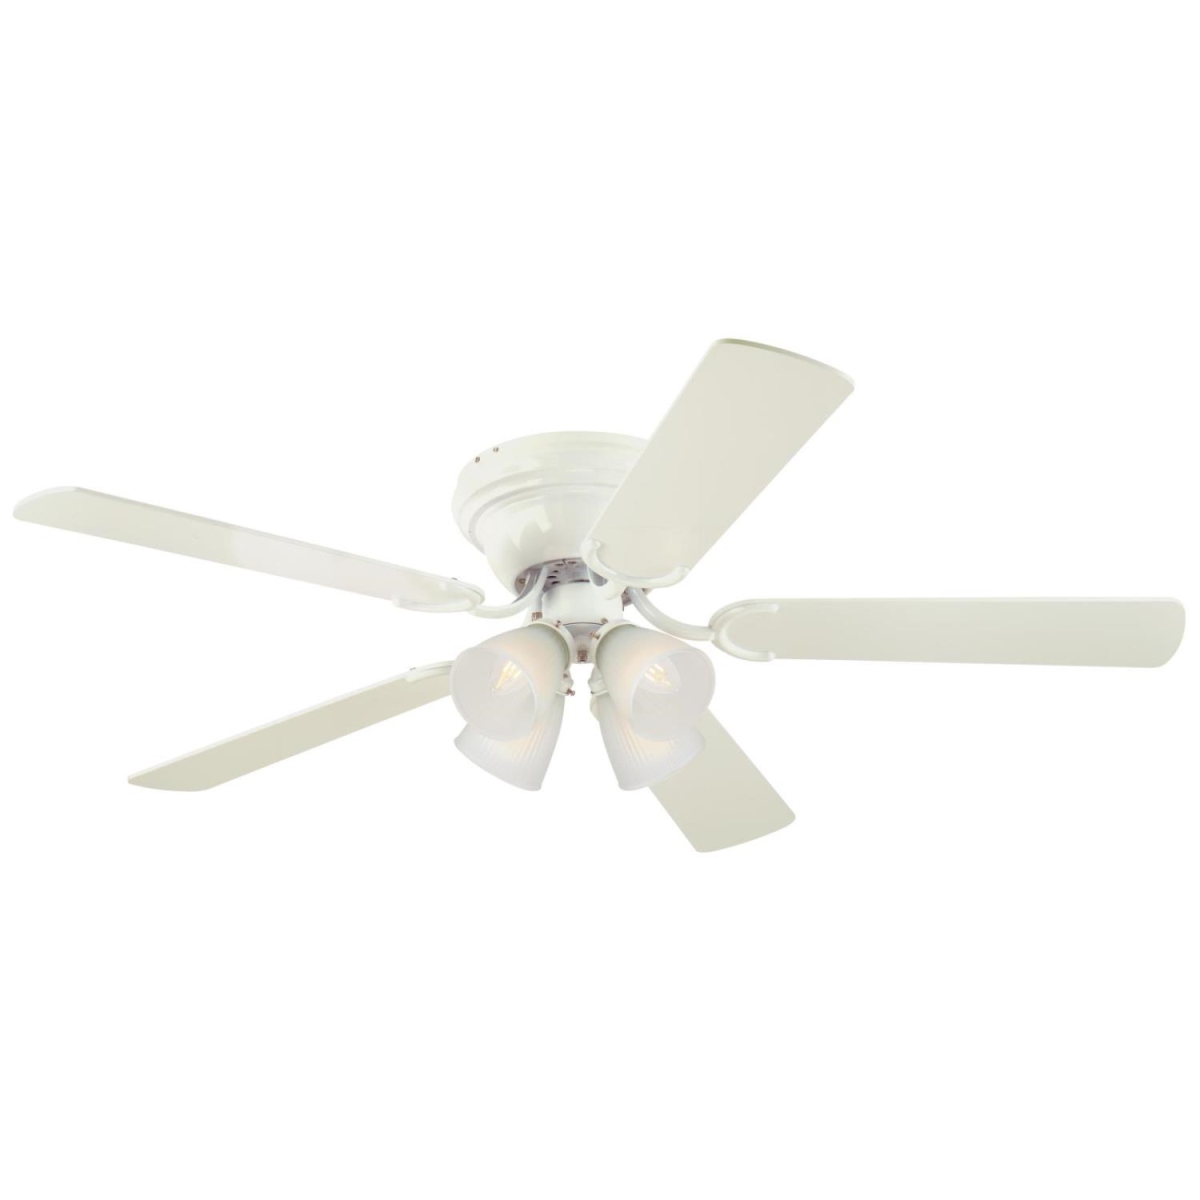 Picture of Westinghouse 7232300 52 in. Ceiling Fan with Dimmable LED Light Fixture White Finish Reversible Blades White & White Washed Pine Frosted Ribbed Glass